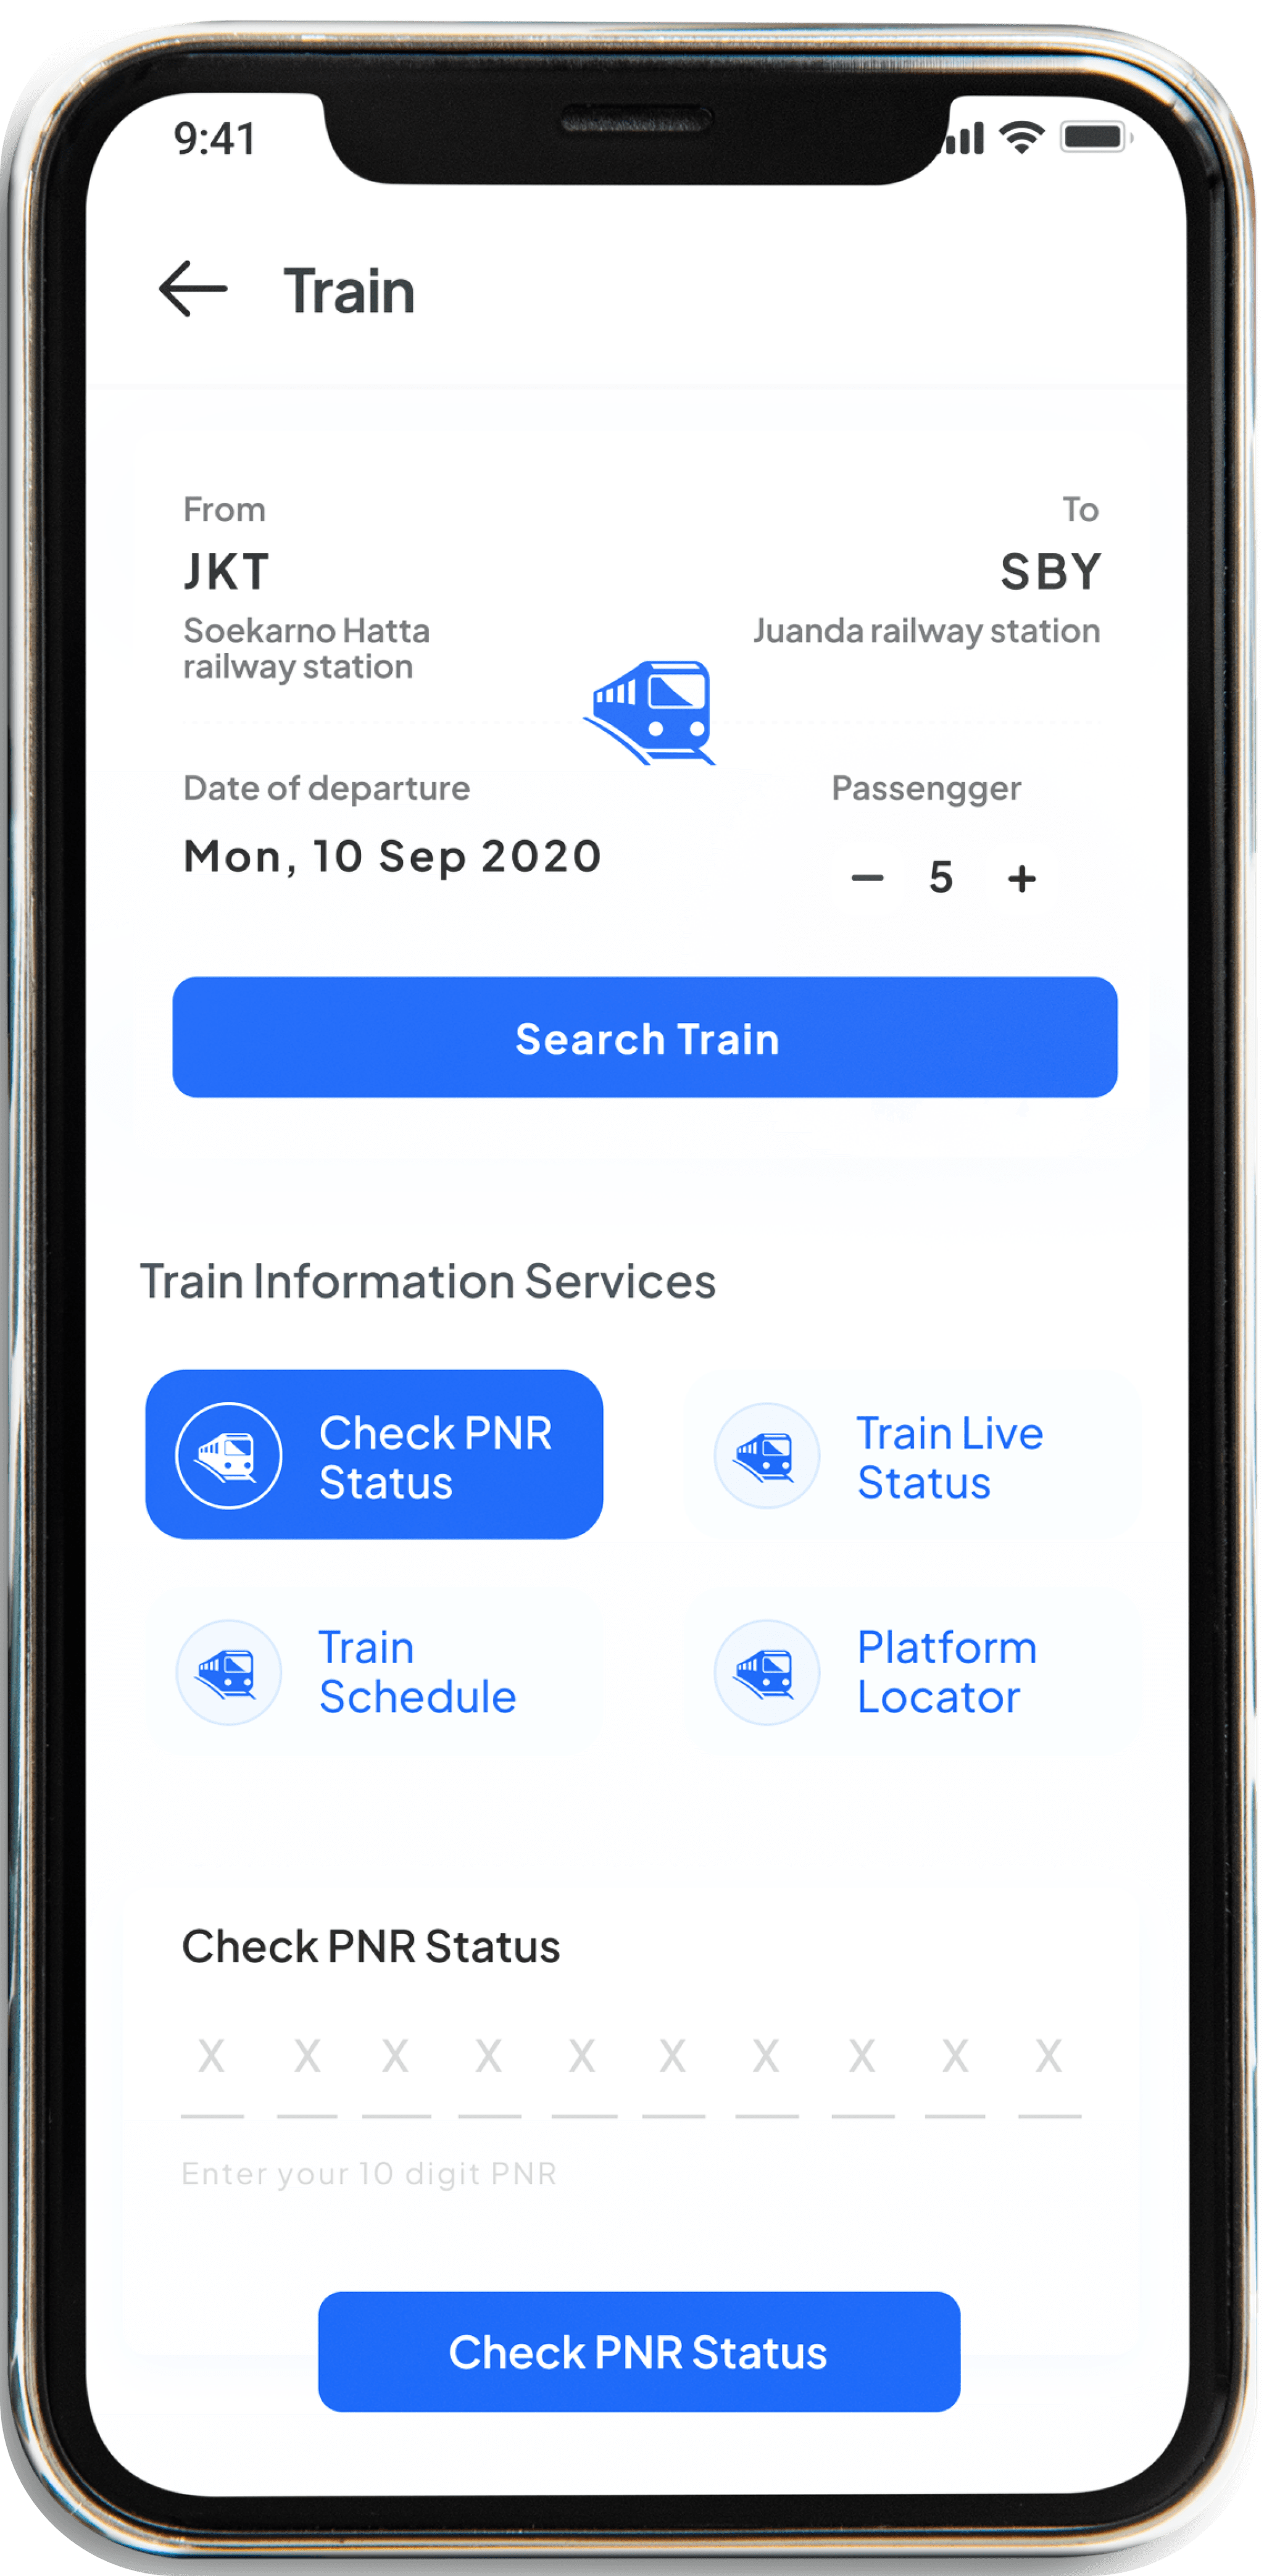 Title - Train Booking